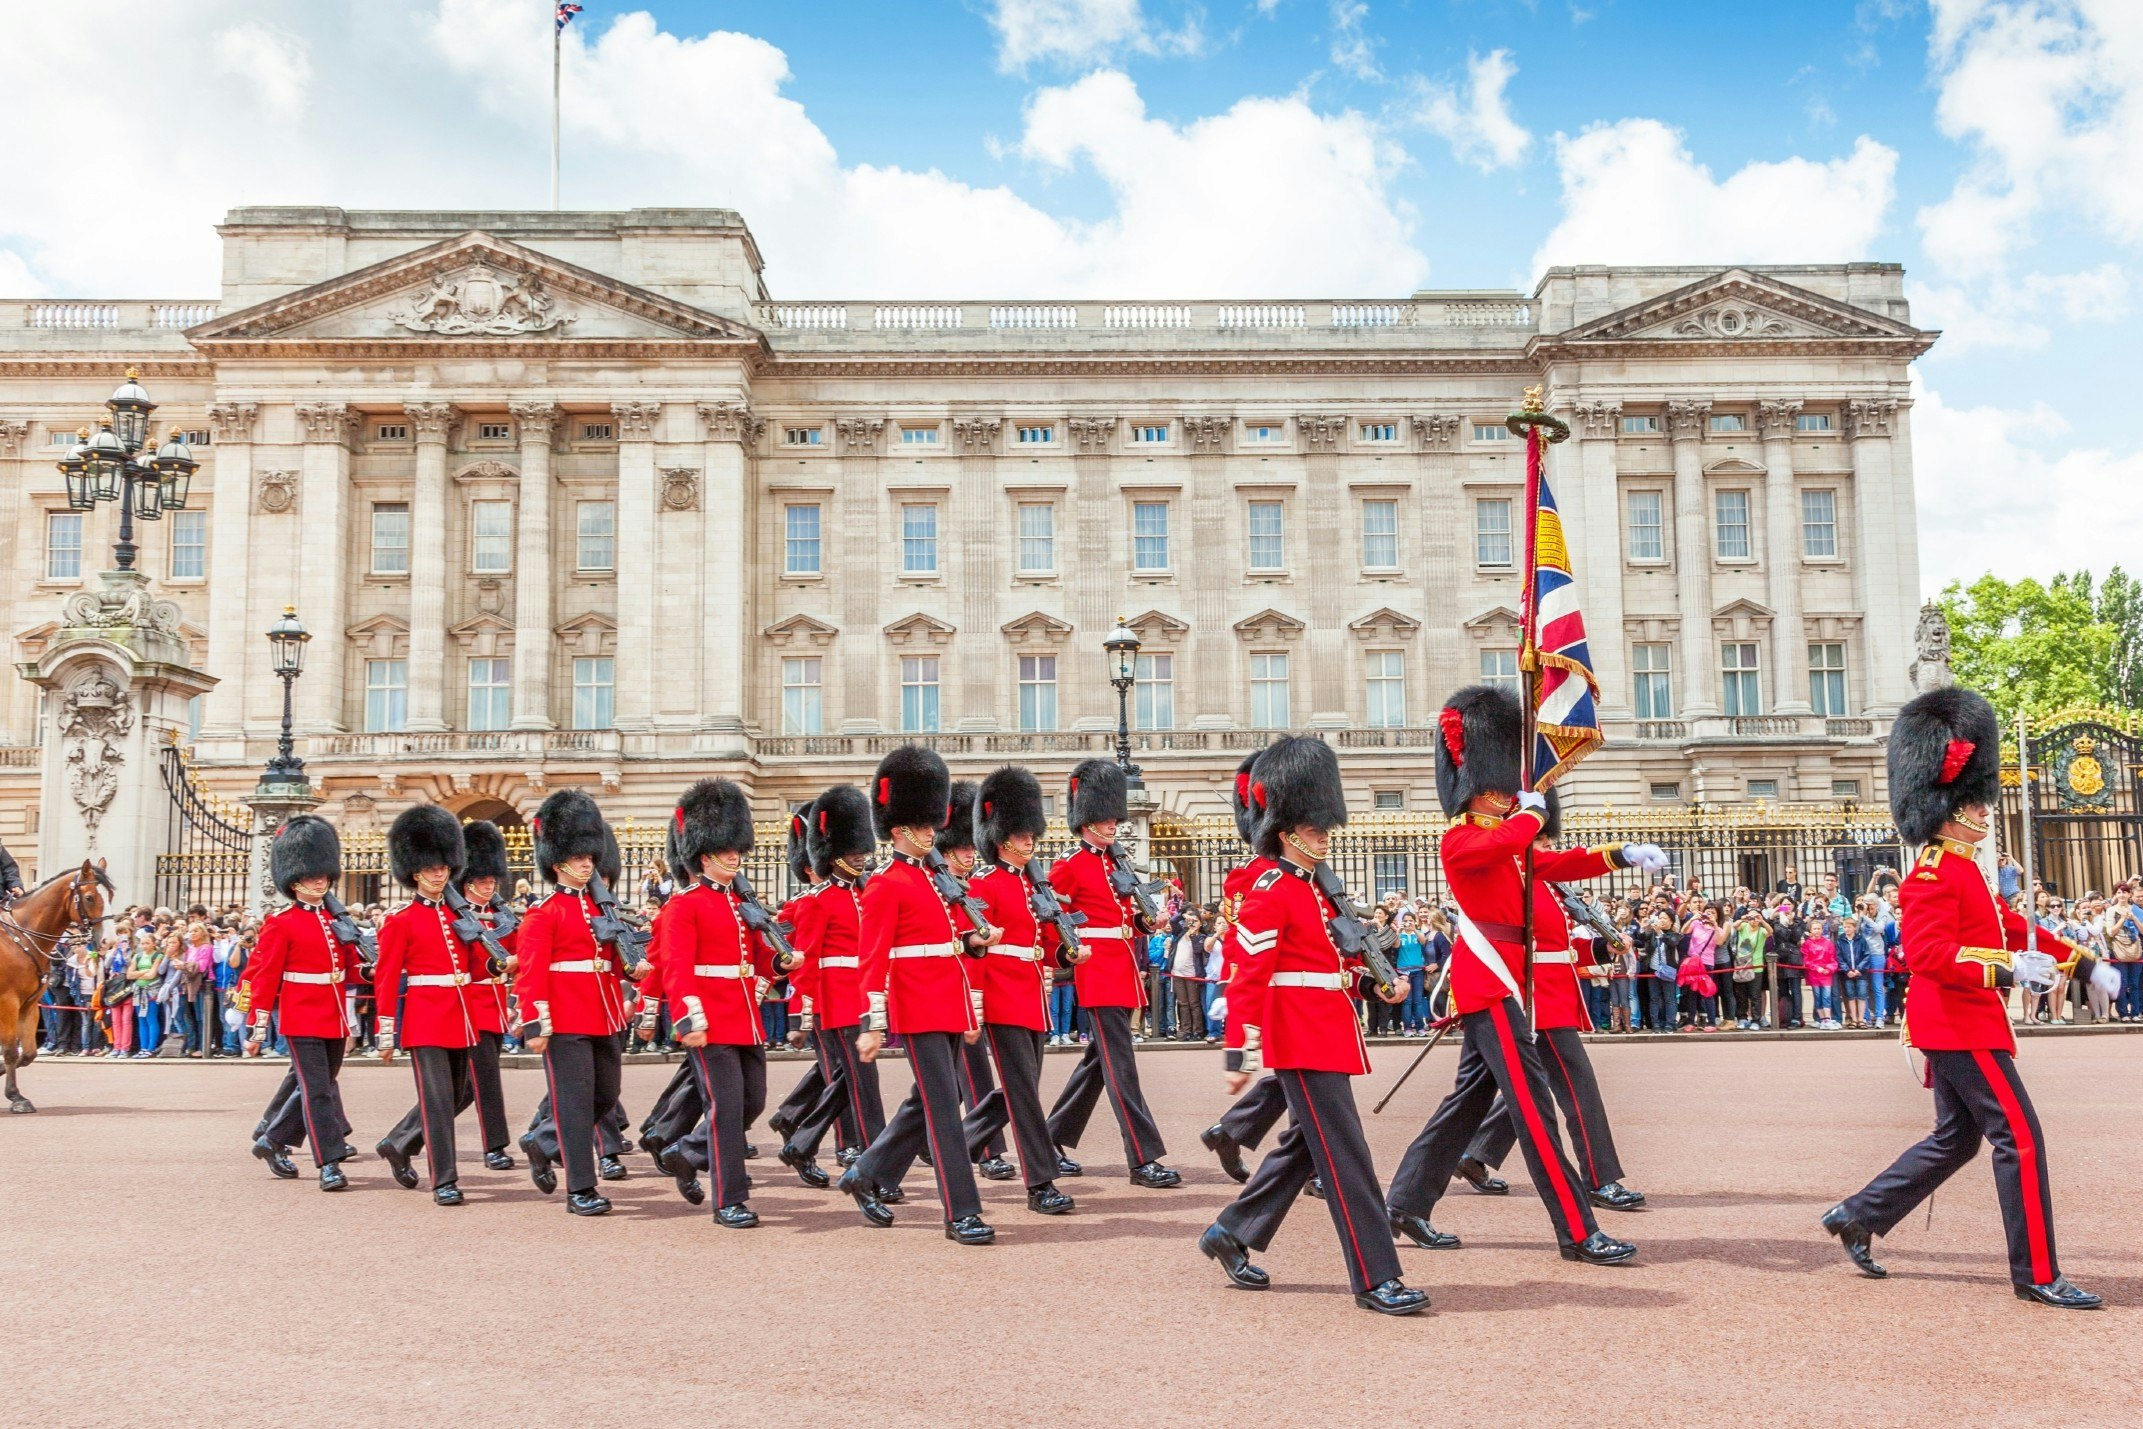 Officers and soldiers of the Coldstream Guards march in front of Buckingham Palace during the Changing of the Guard ceremony